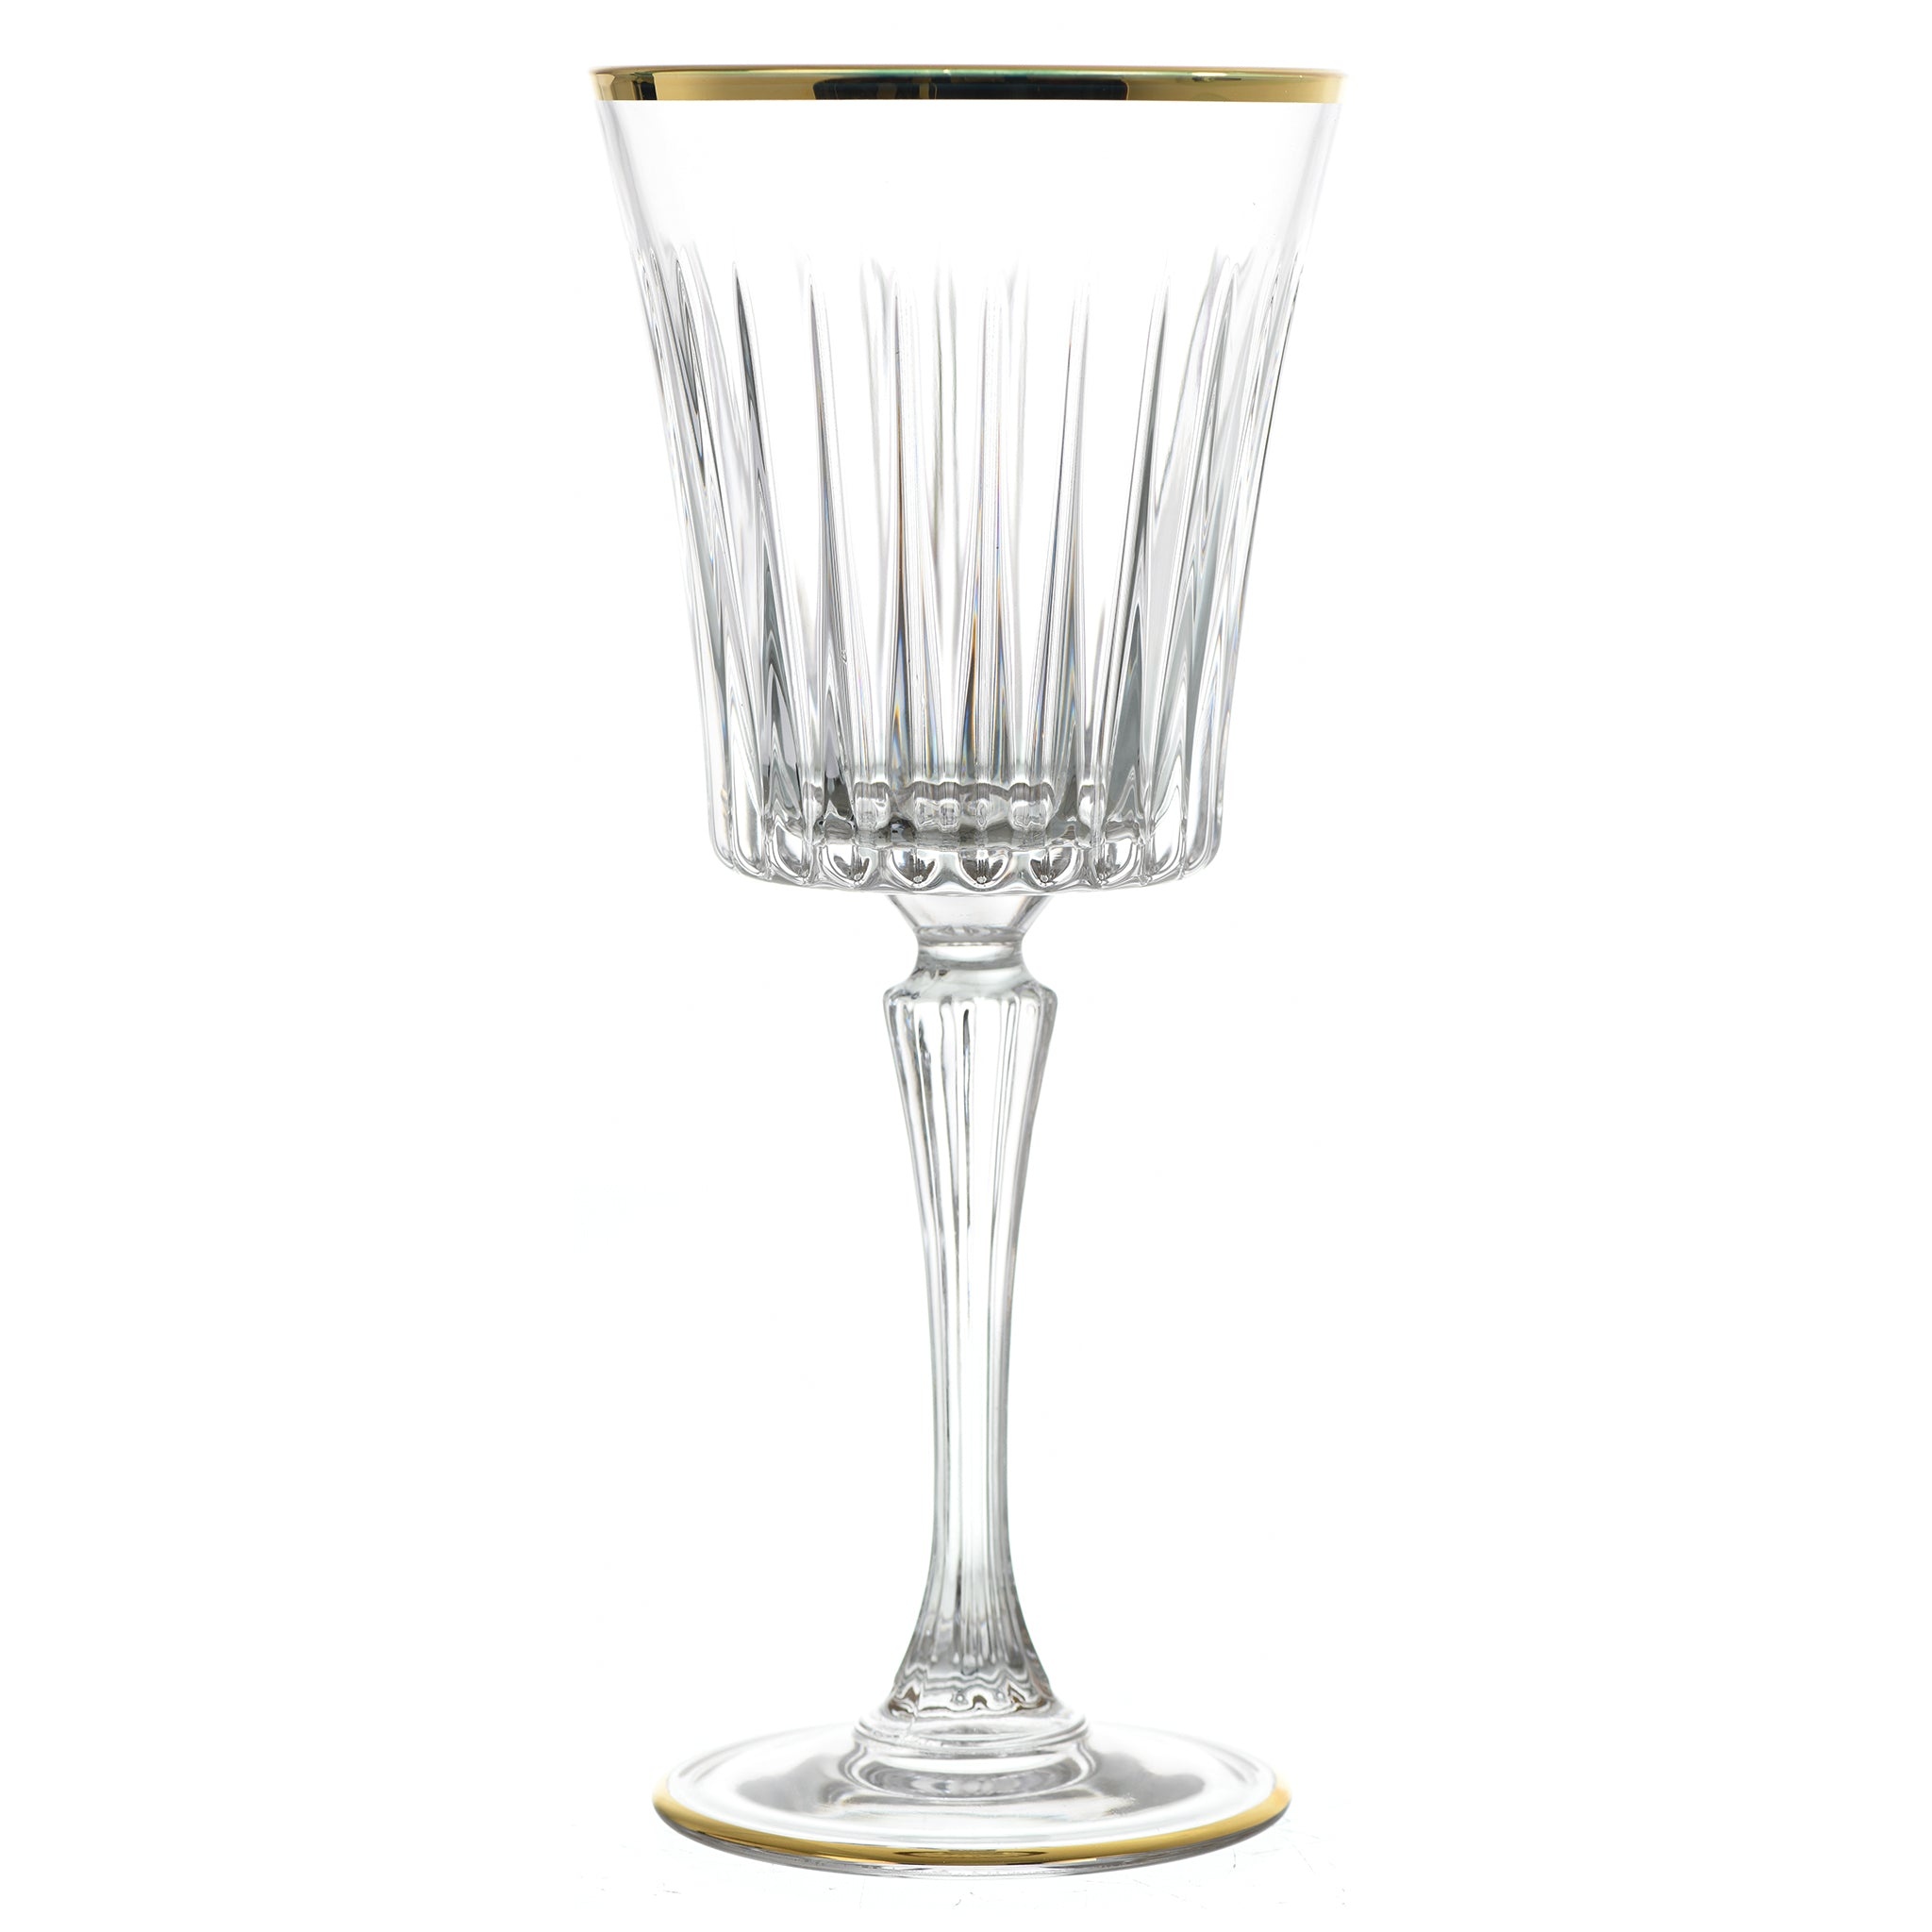 RCR Italy goblet glass, Set of 6 pieces, Gold accents, 2050x2050 HD Handy